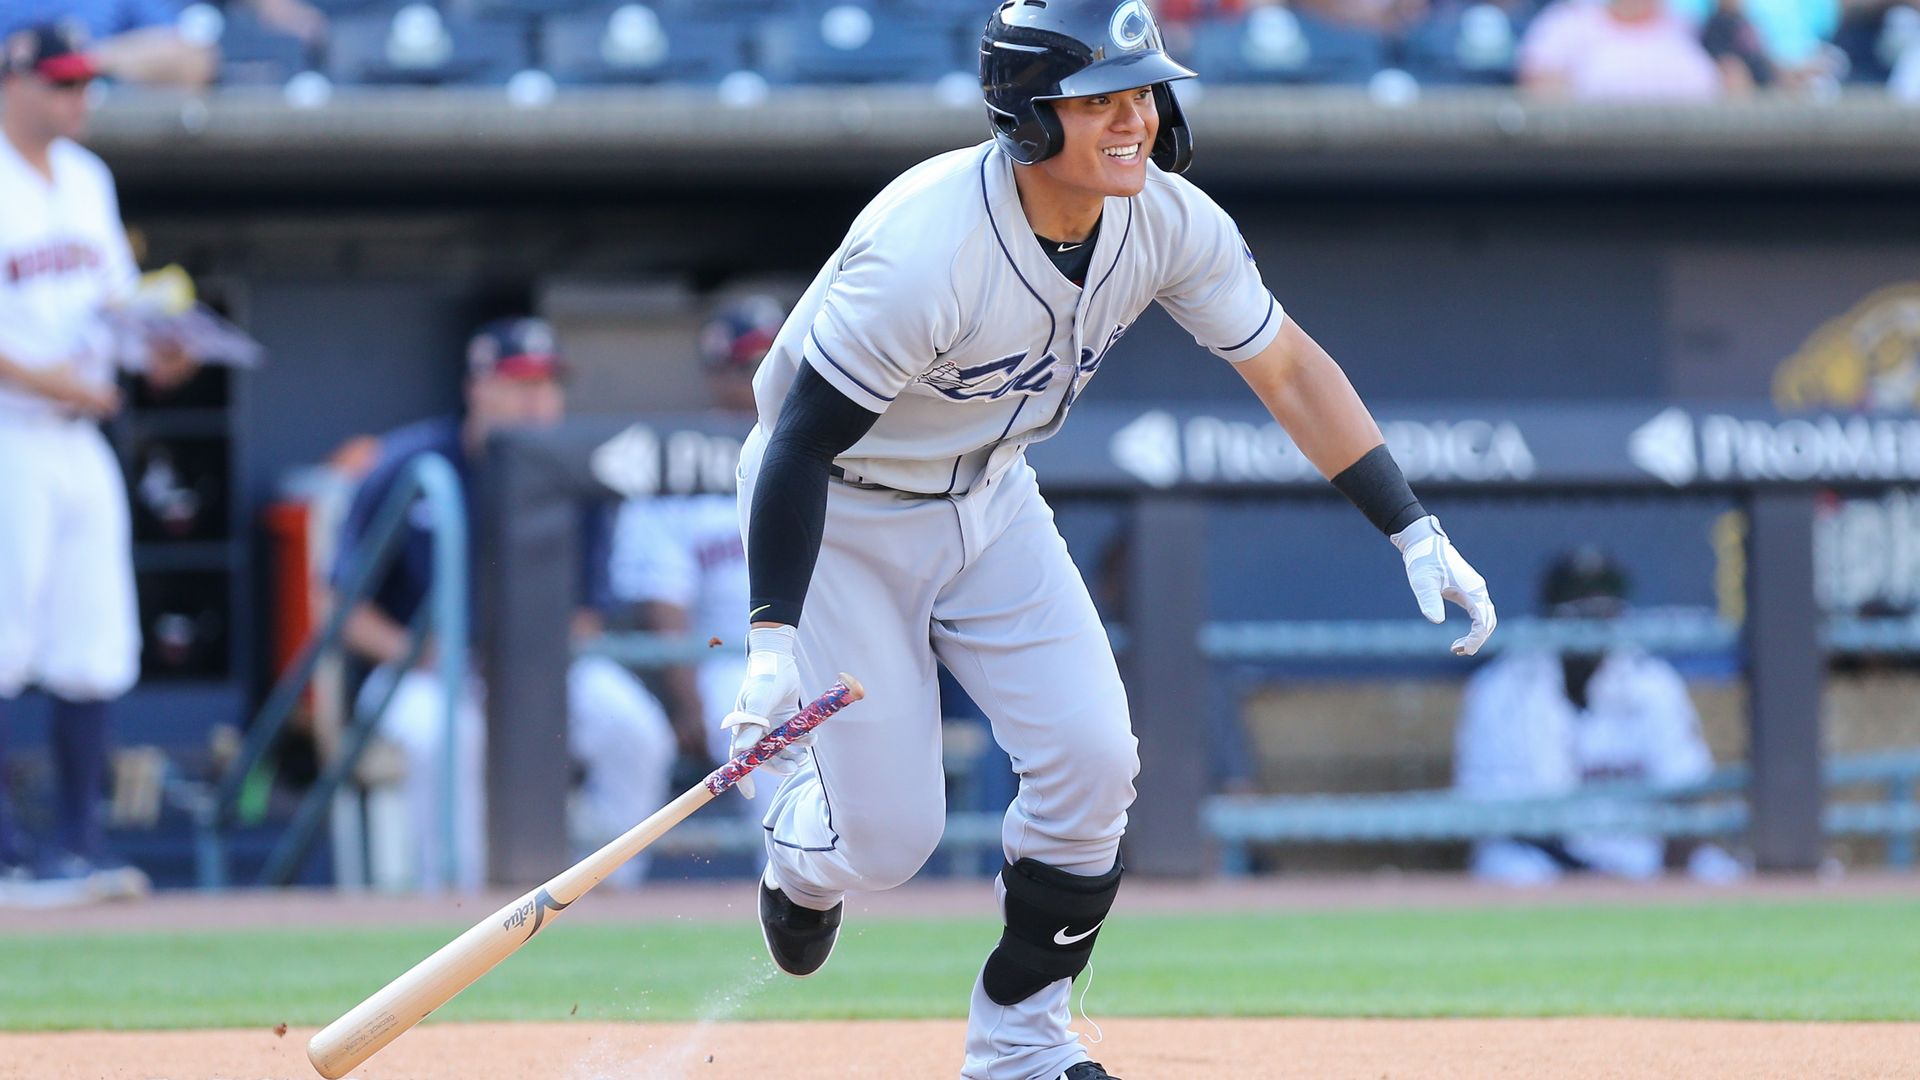 Columbus Clippers player Yu Chang drops his bat after a swing.